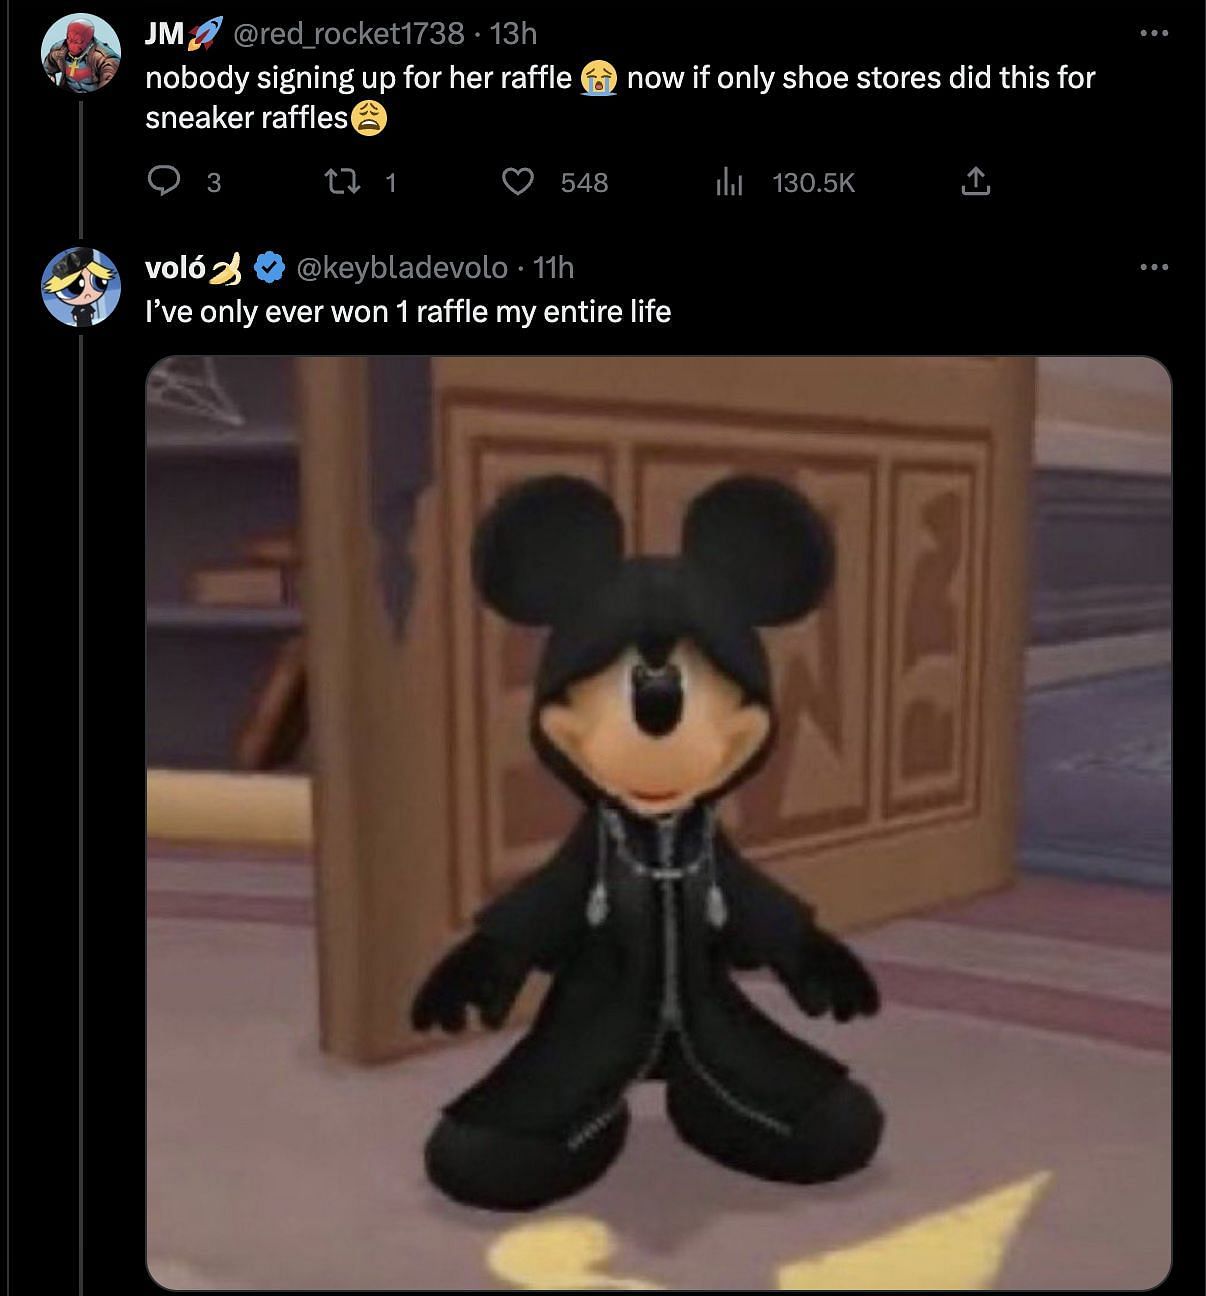 Social media users shocked as Disney Star asked for $5 from her followers during a TikTok Live Session. (Image via Twitter)